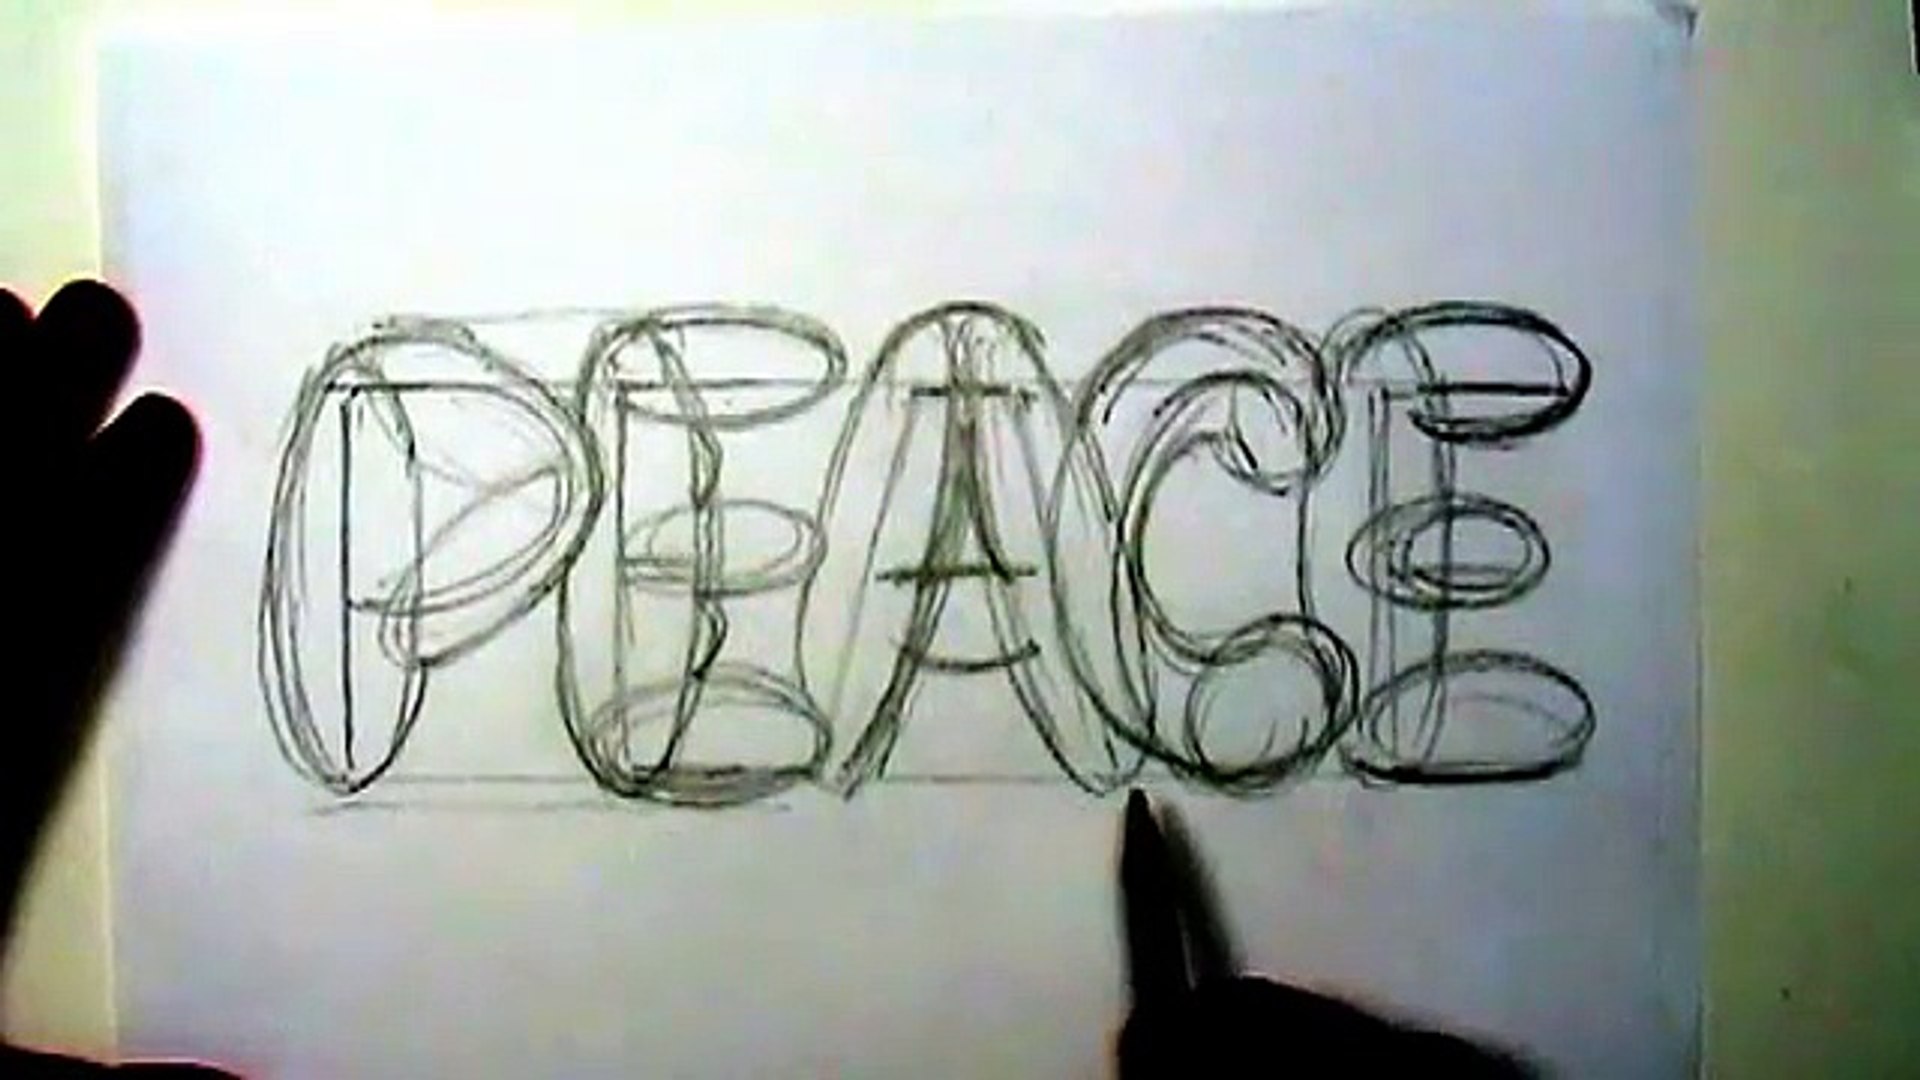 How To Draw Peace In Graffiti Letters Write Peace In Bubble Letters Mat Dailymotion Video